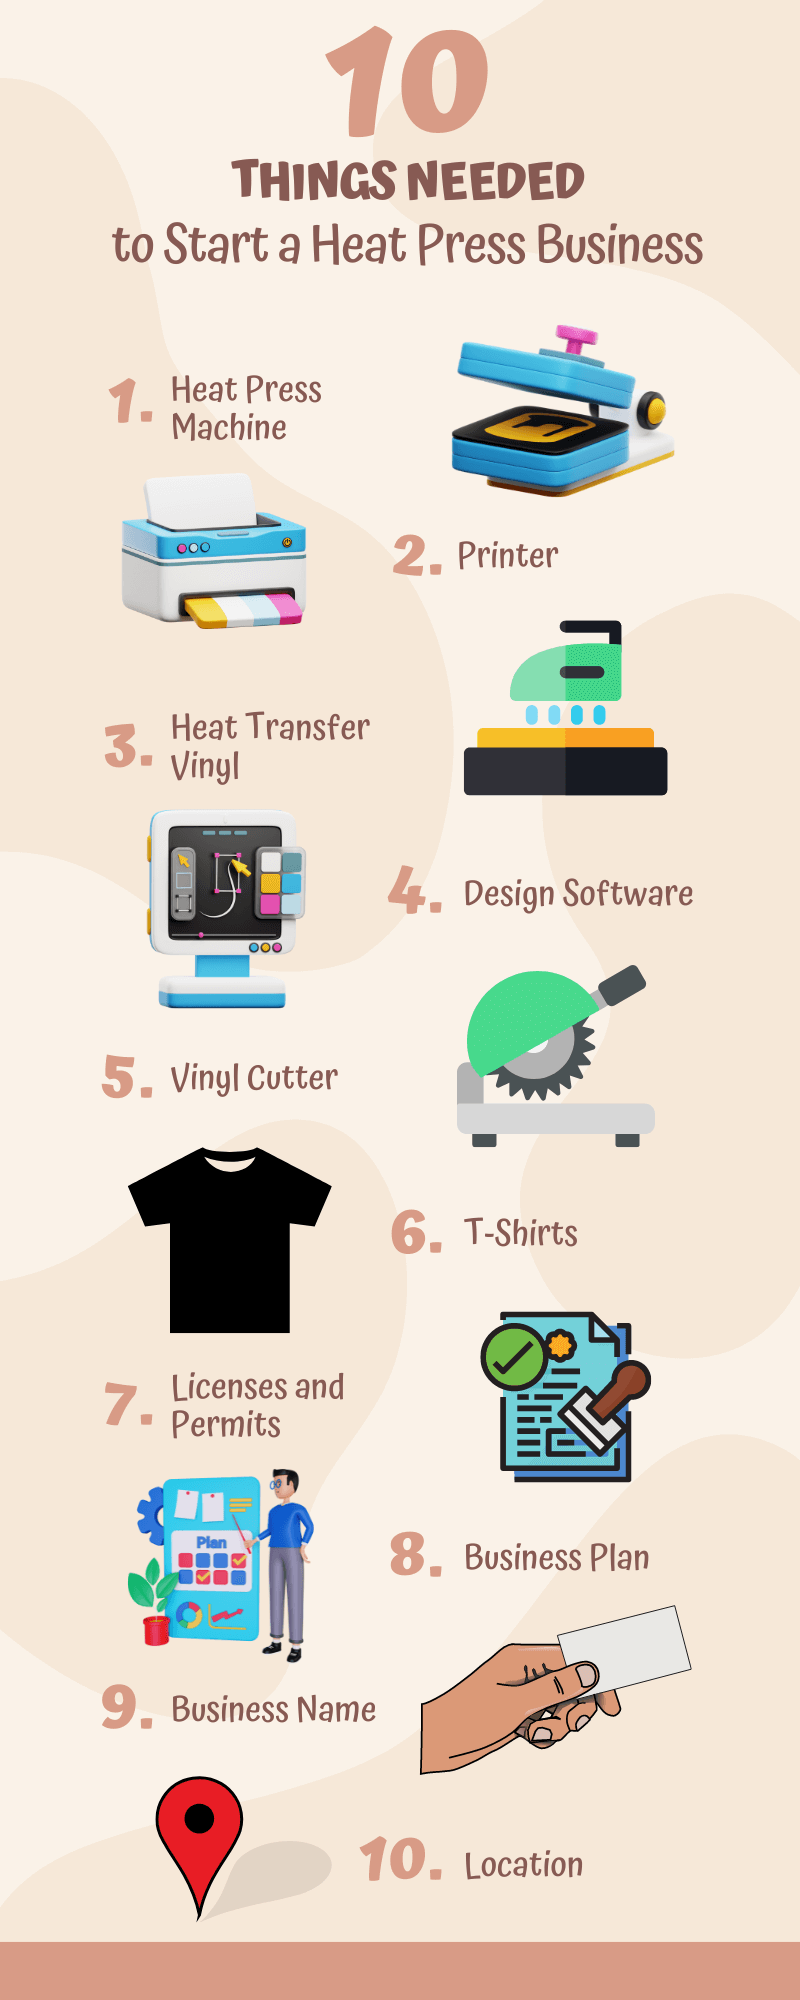 everything needed to start a heat press business - infographic